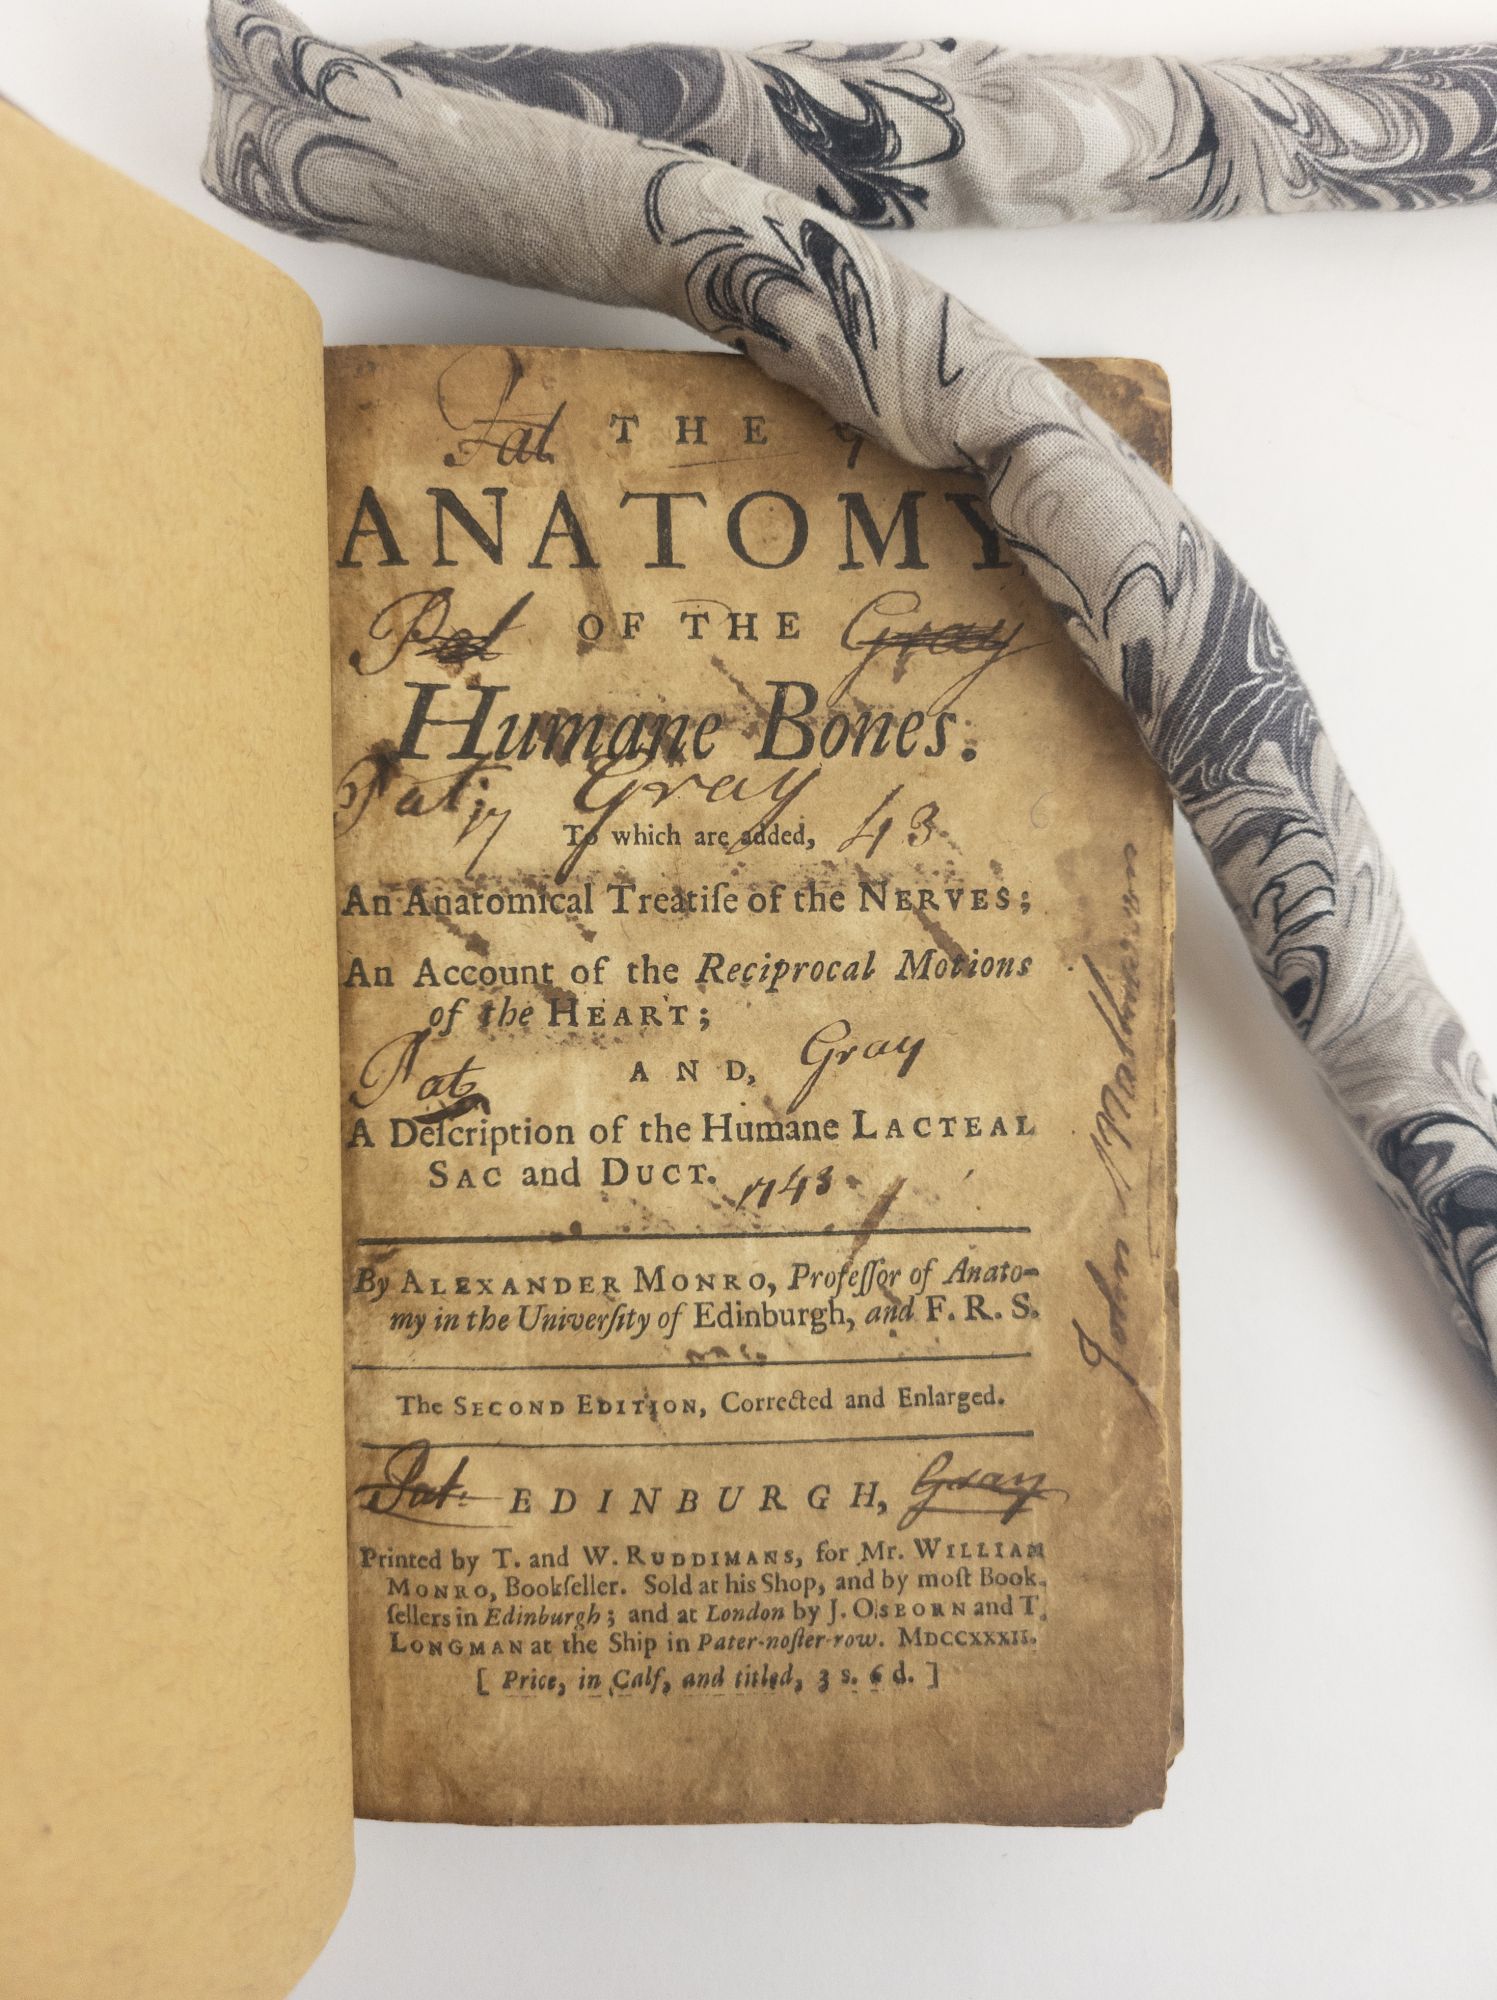 Product Image for THE ANATOMY OF THE HUMANE BONES. TO WHICH ARE ADDED, AN ANATOMICAL TREATISE OF THE NERVES; AN ACCOUNT OF THE RECIPROCAL MOTIONS OF THE HEART; AND, A DESCRIPTION OF THE HUMANE LACTEAL SAC AND DUCT